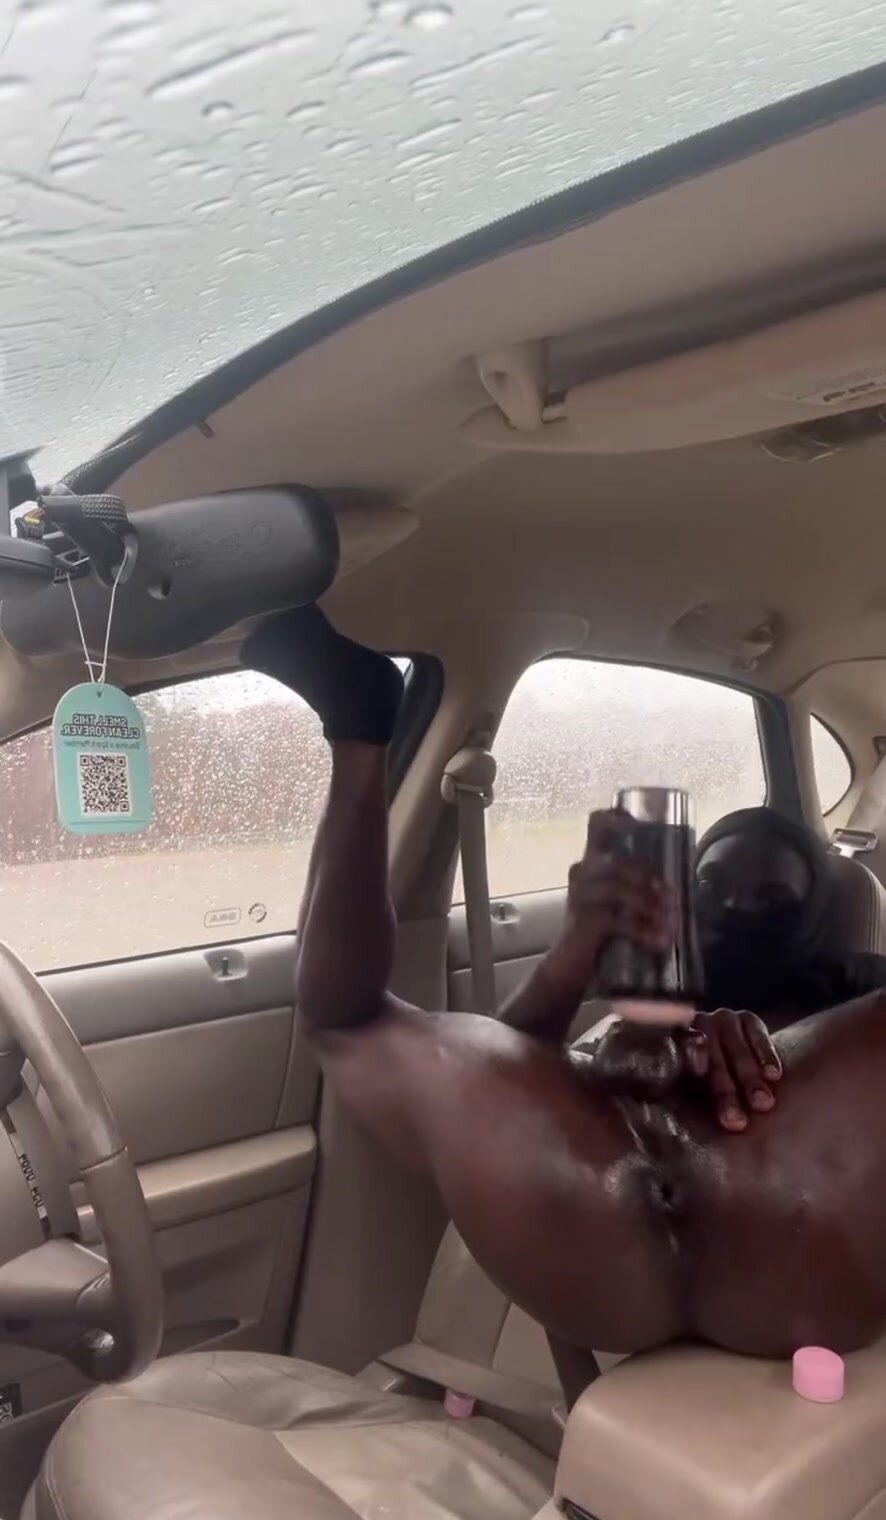 DL thug beating his dick ass spread in car